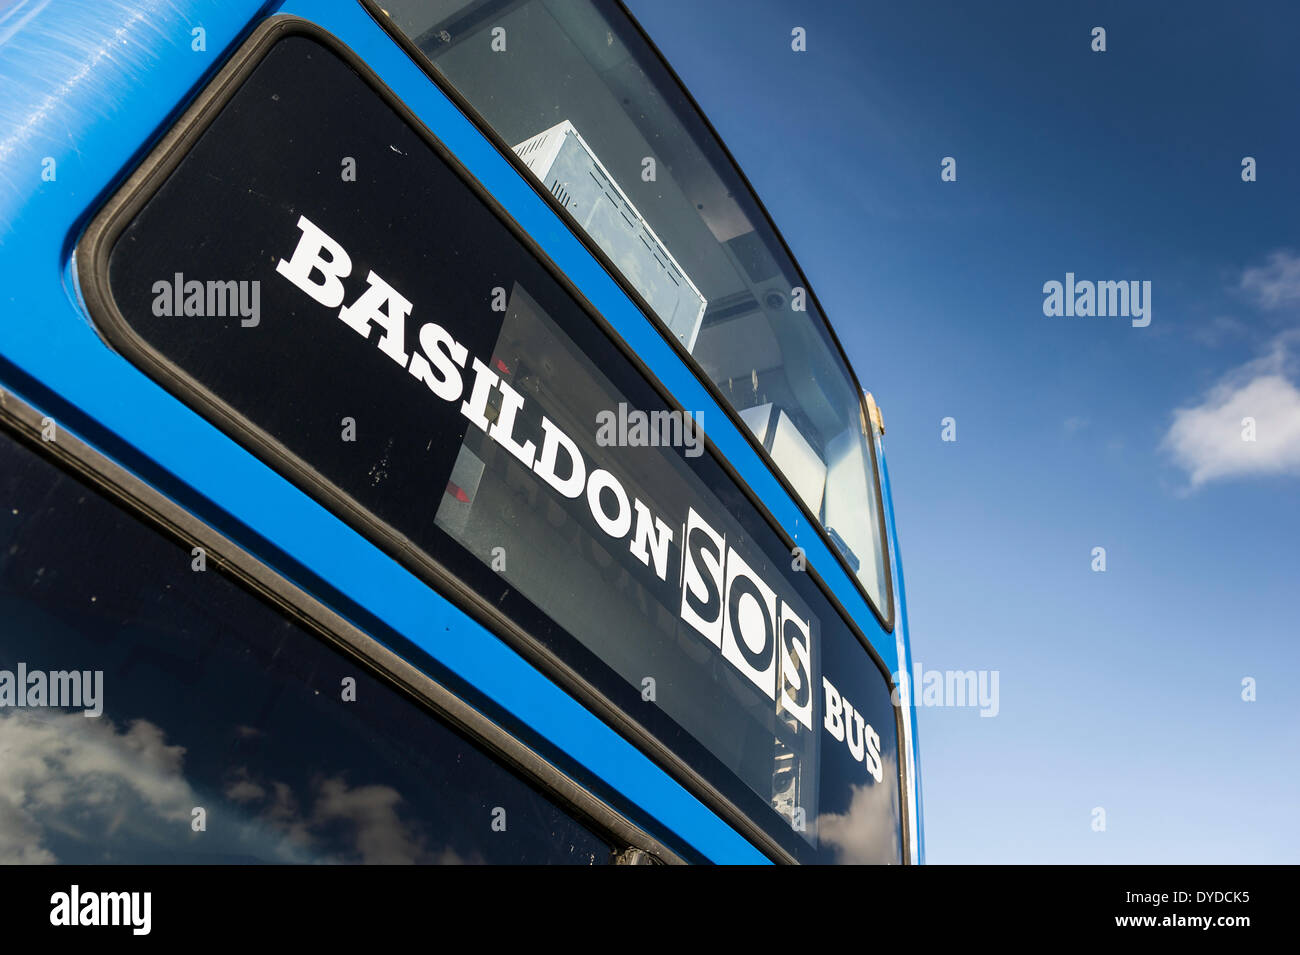 The Basildon SOS bus at the Brownstock Festival in Essex. Stock Photo